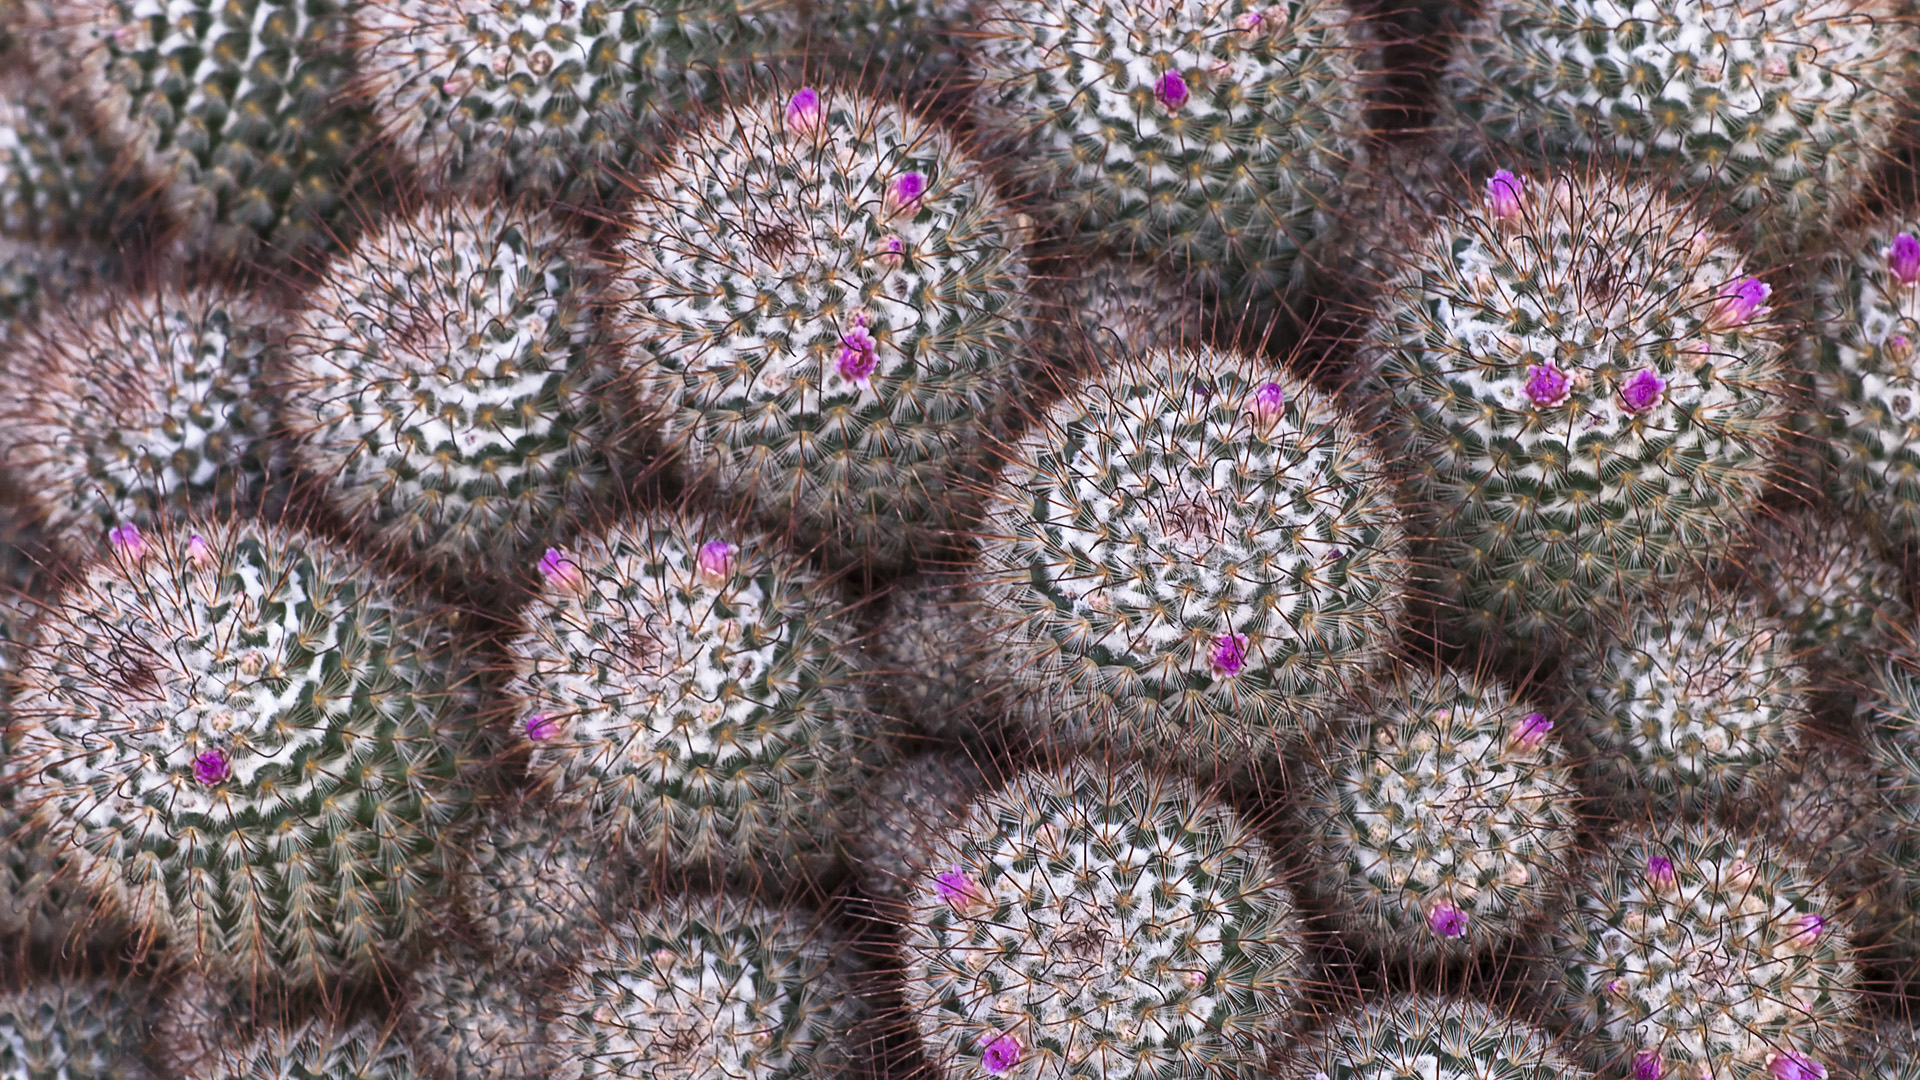 Earth Cactus HD Wallpaper | Background Image